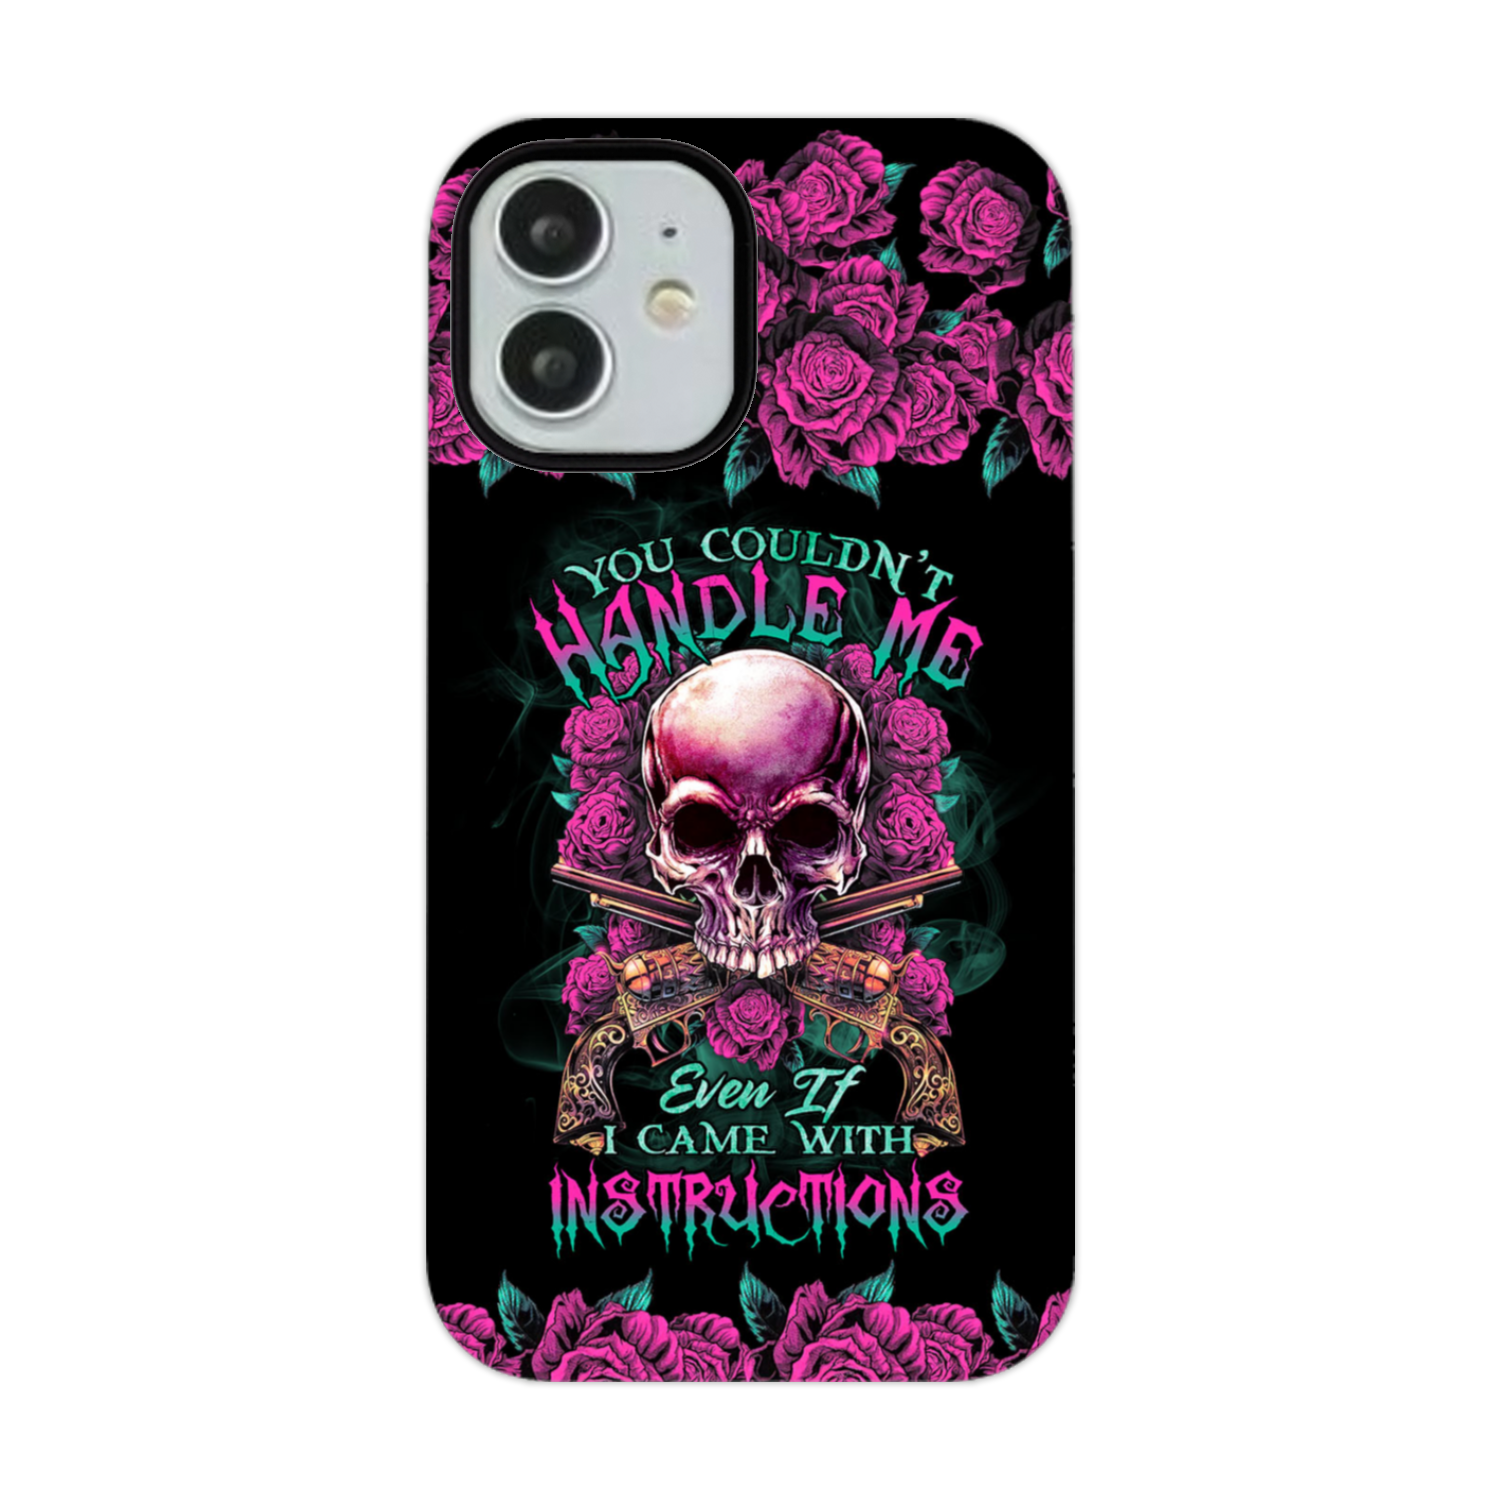 YOU COULDN'T HANDLE ME SKULL G PHONE CASE - TLTR1412223